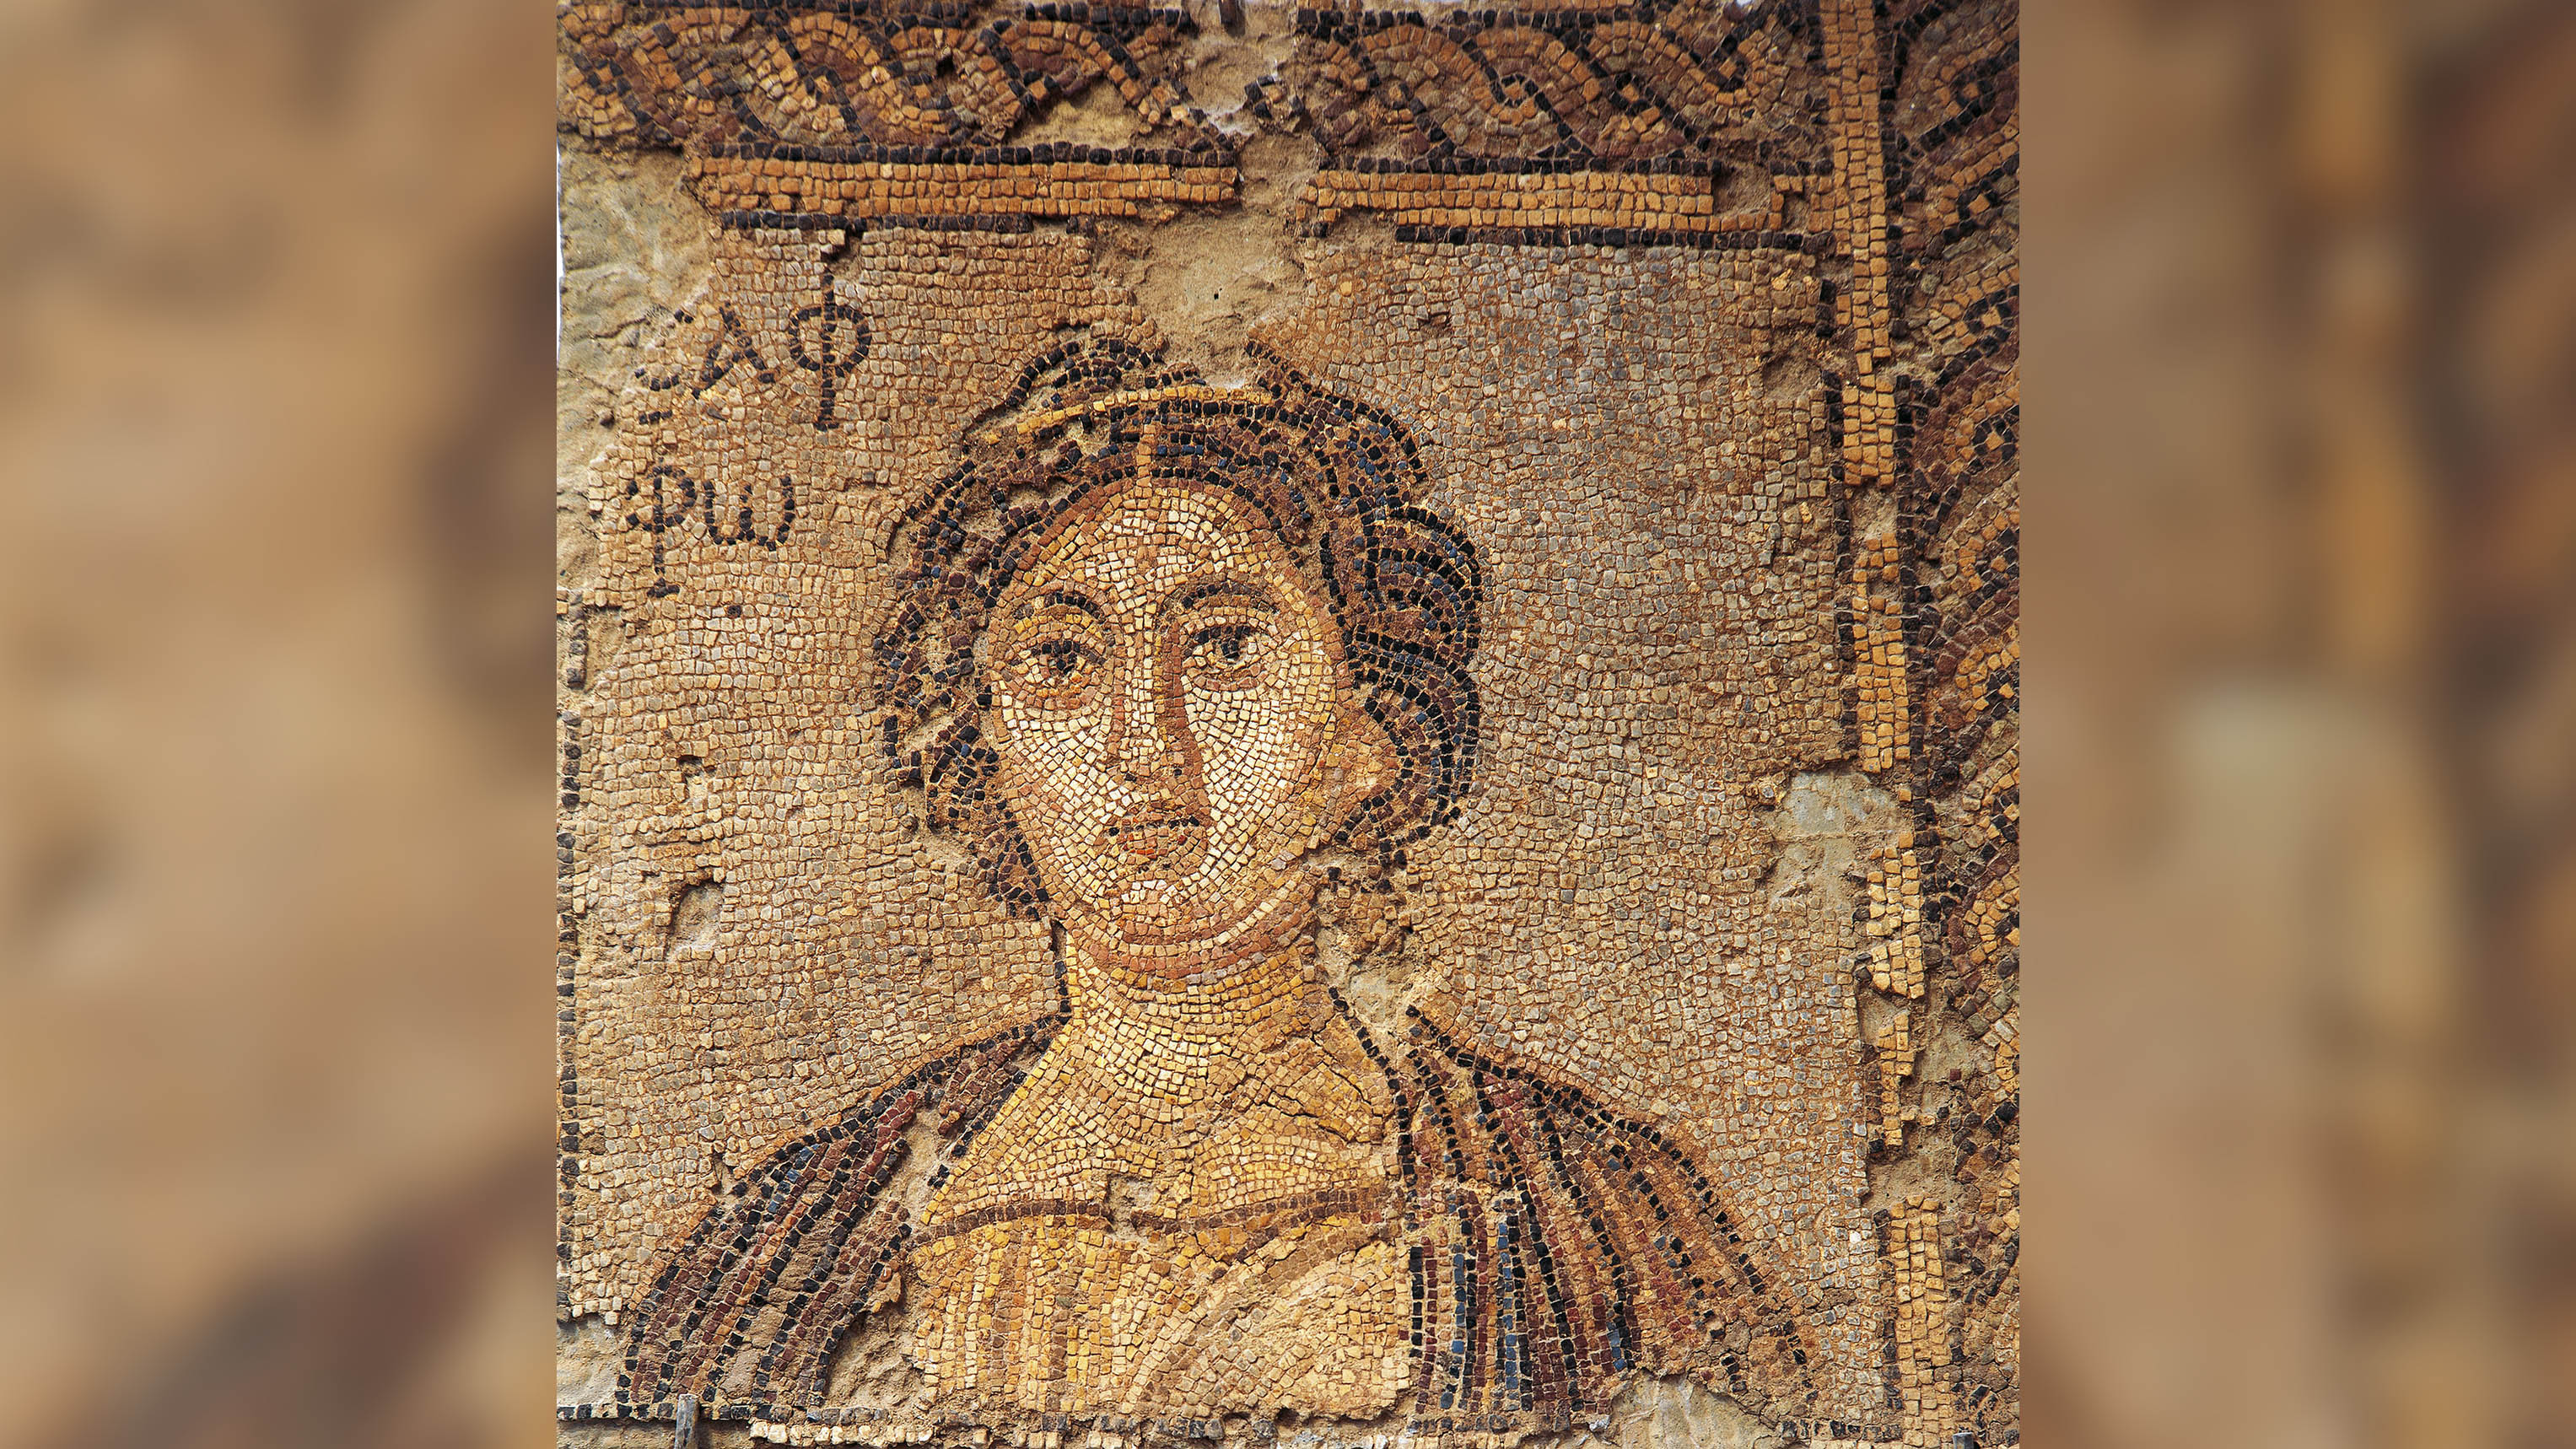 This mosaic fragment depicts the poetess Sappho.